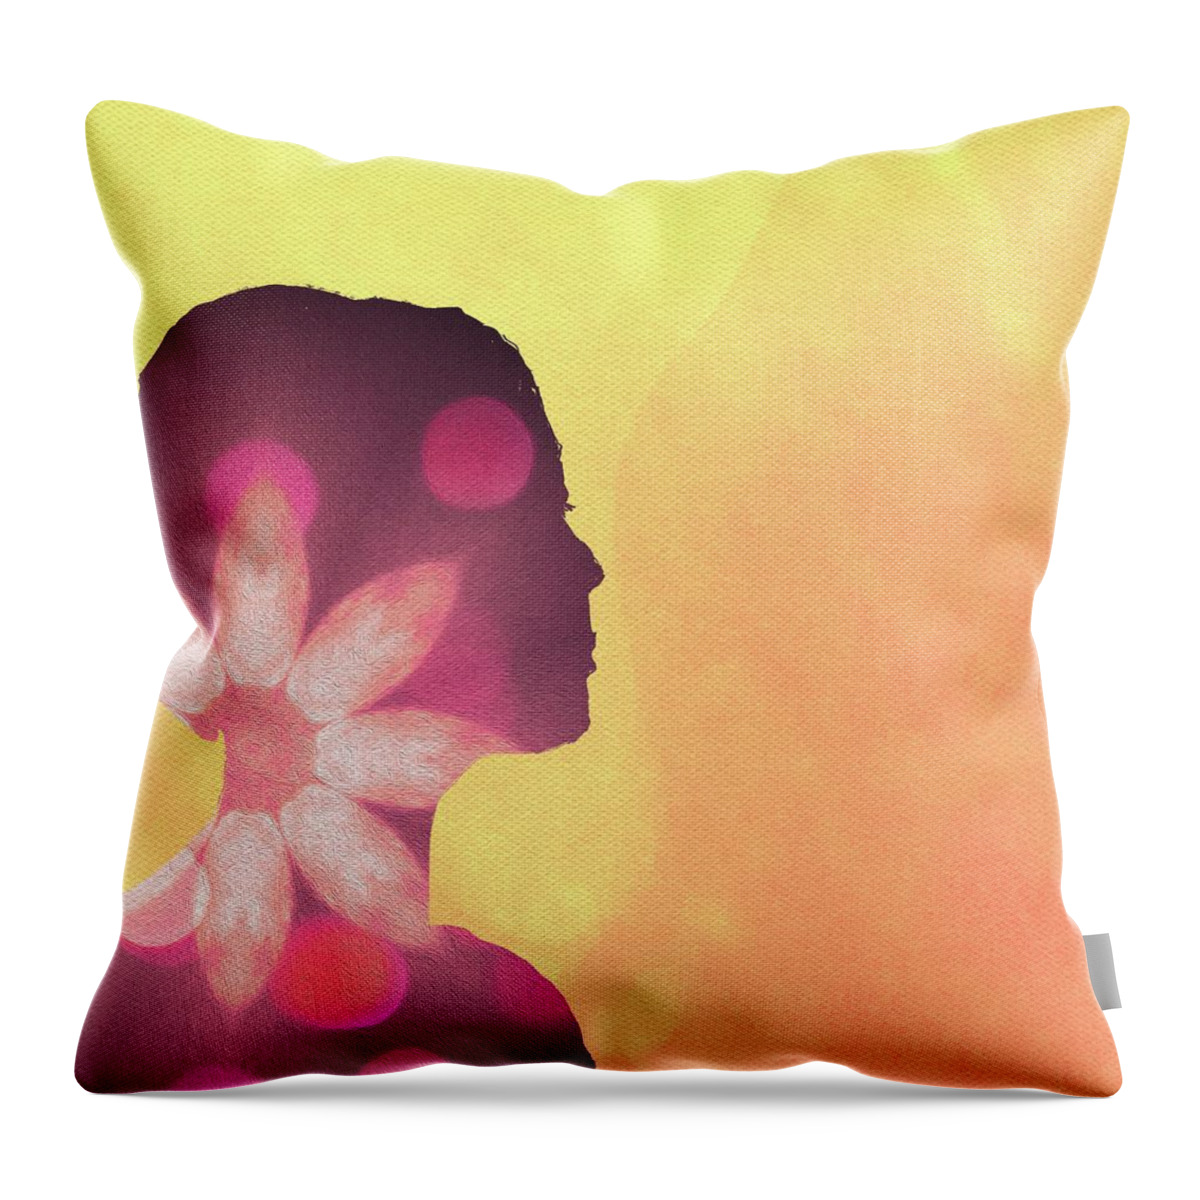 Pink Throw Pillow featuring the mixed media It reminds me pink flower portrait yellow background by Itsonlythemoon